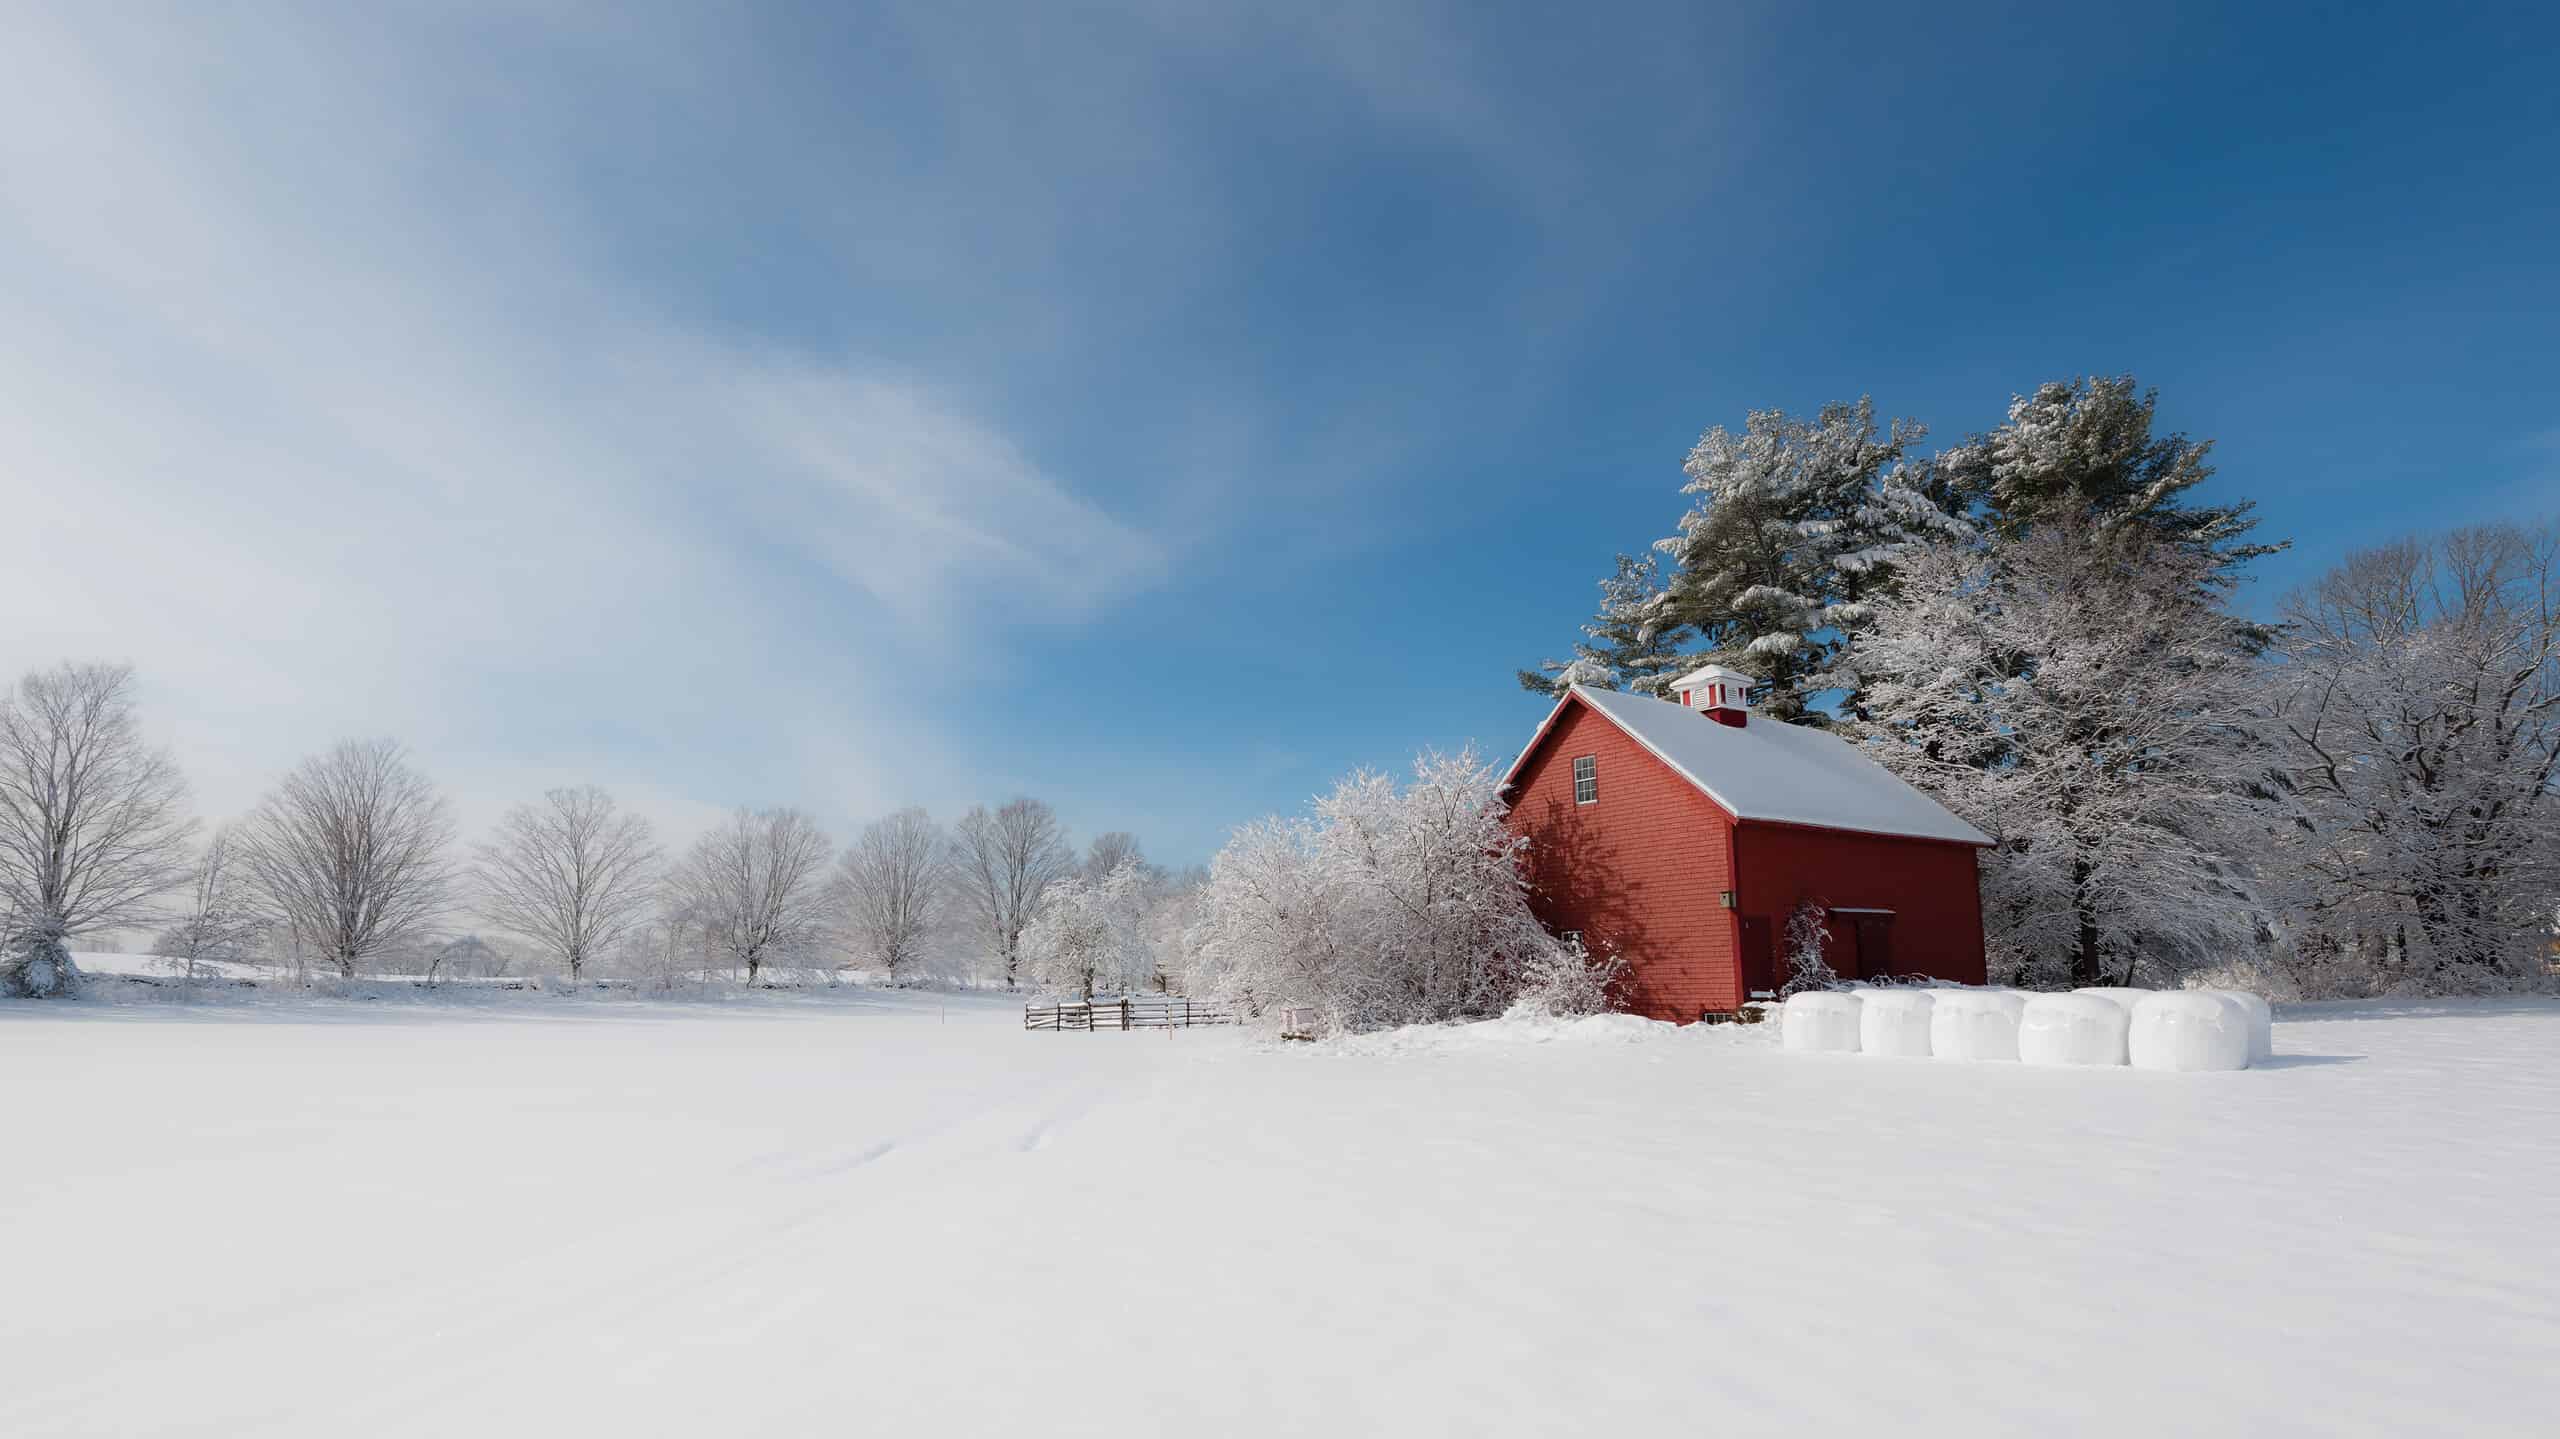 Winter in New England. Red farm building contrasting with white snow and blue sky. Ipswich, Massachusetts, USA